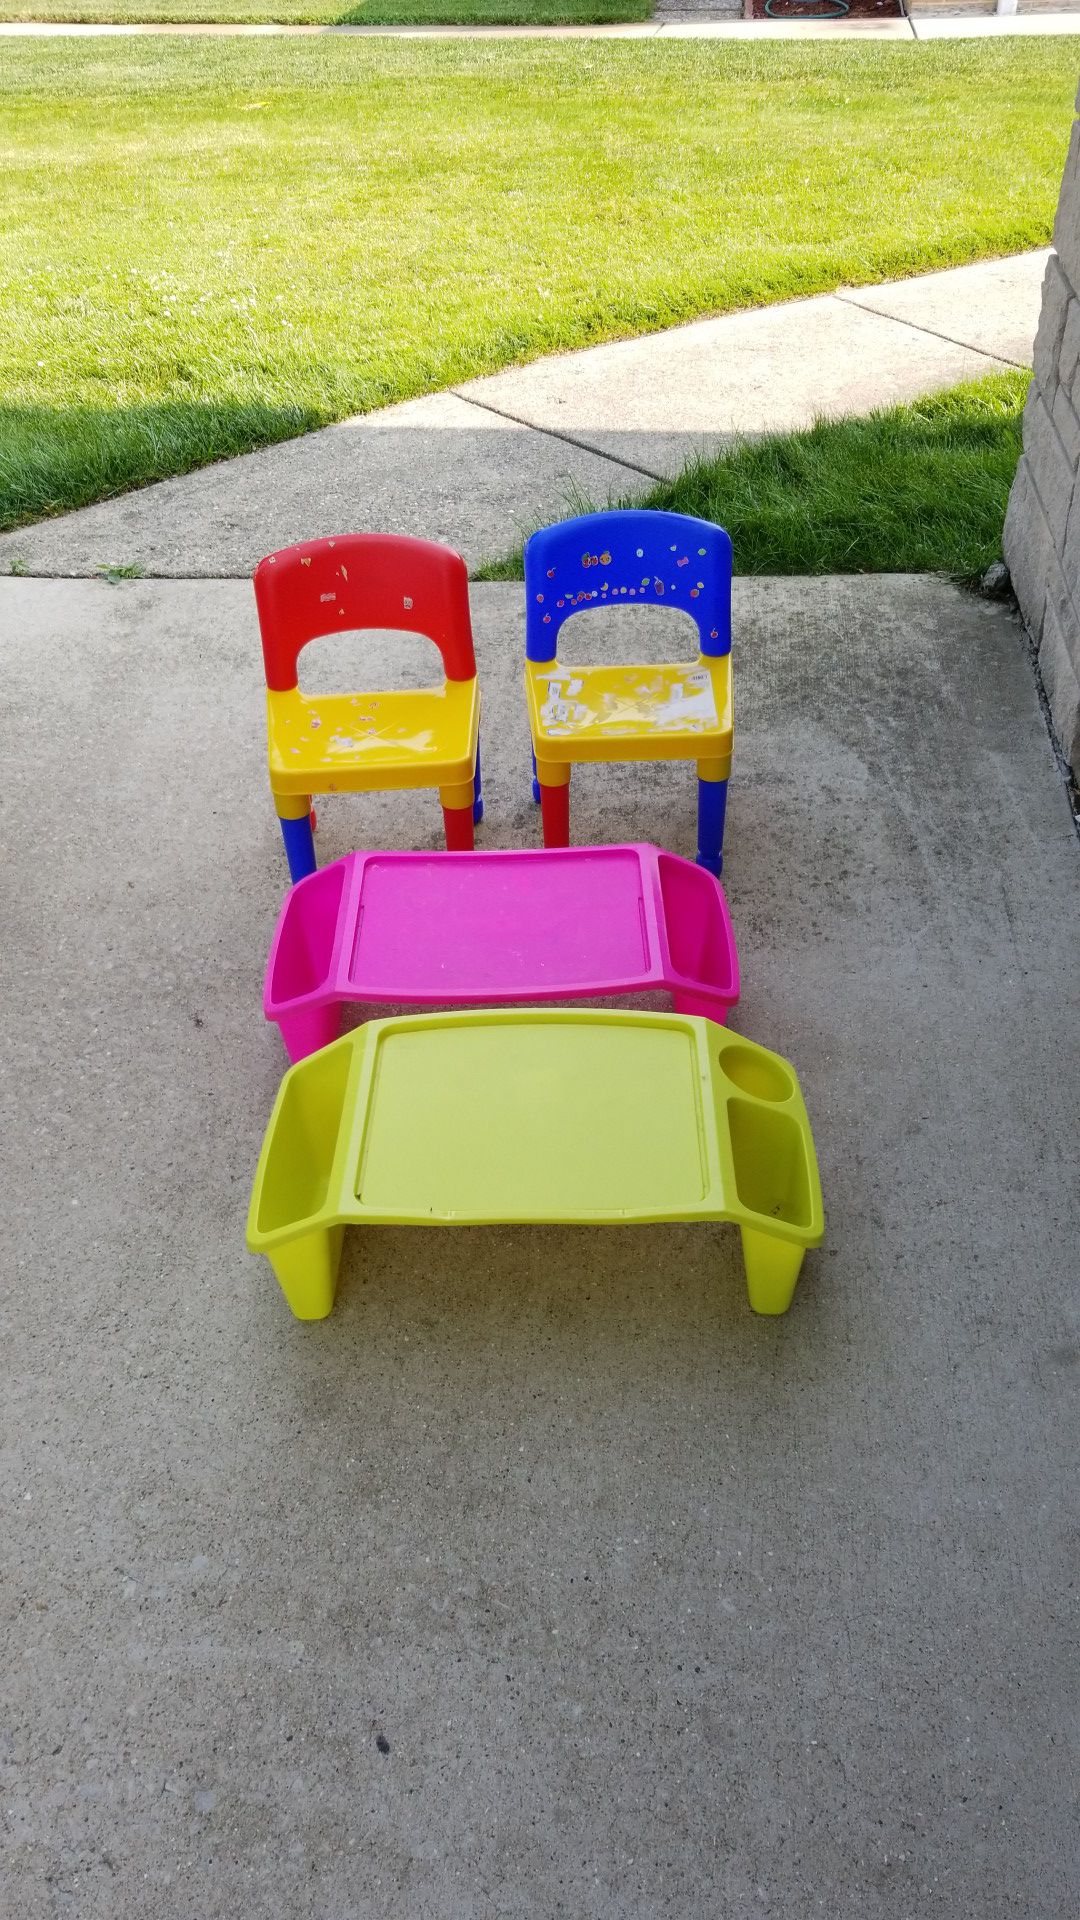 2 kids chairs and 2 snack tables. All for $5